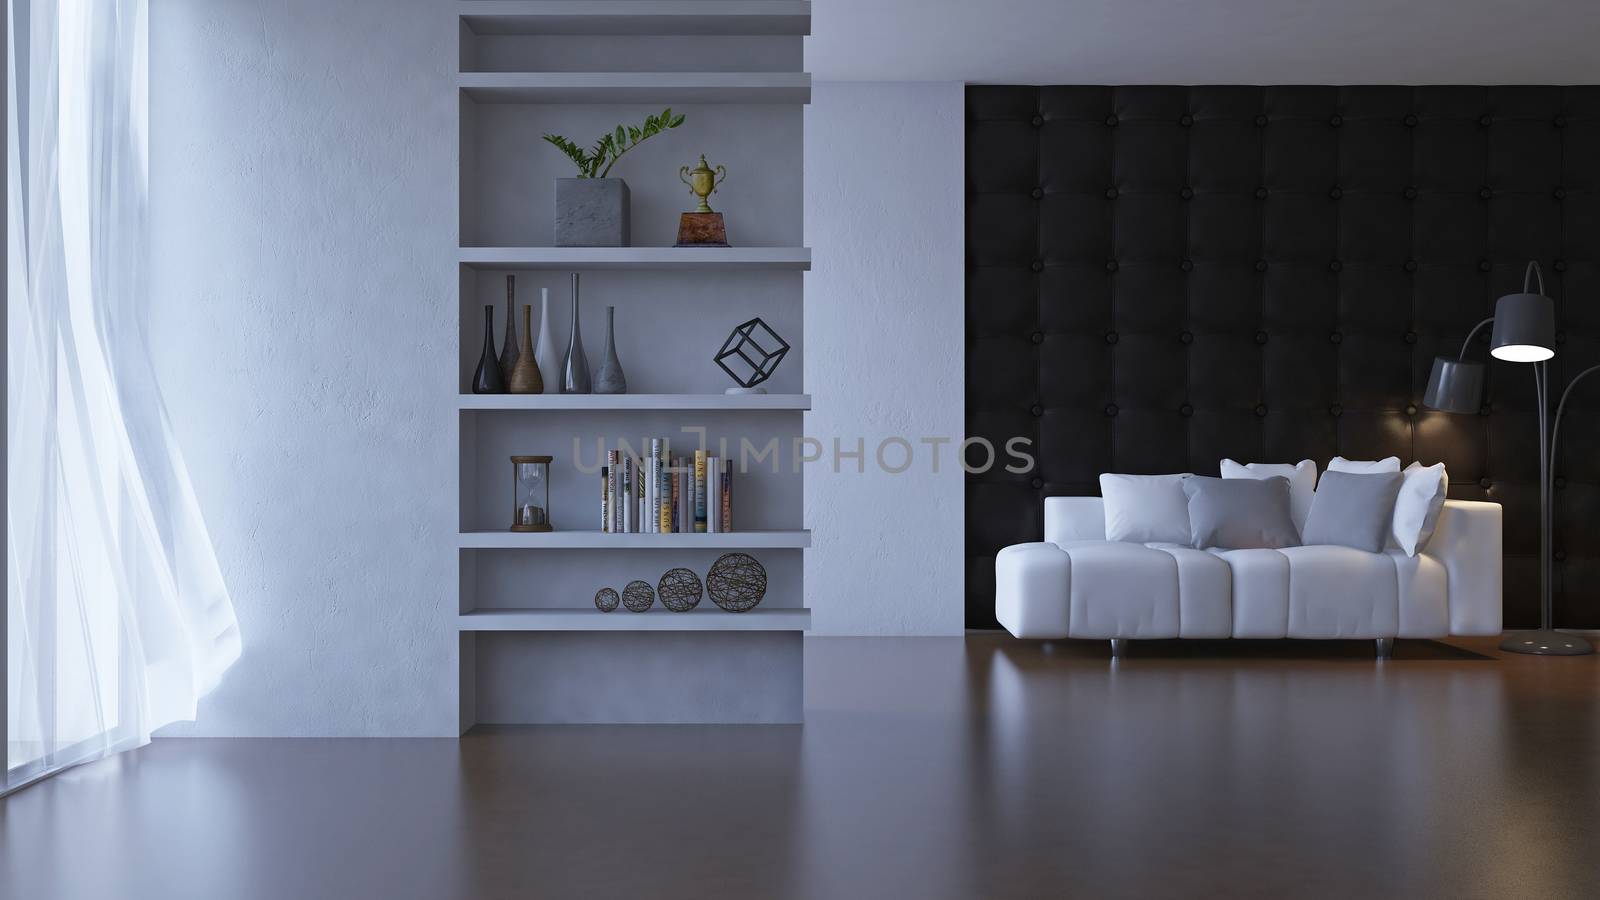 3d rendering of living room. A lot of decoration objects place on the built in shelf in the concrete wall. White sofa and dark desk lamp on timber floor which have leather wall as background